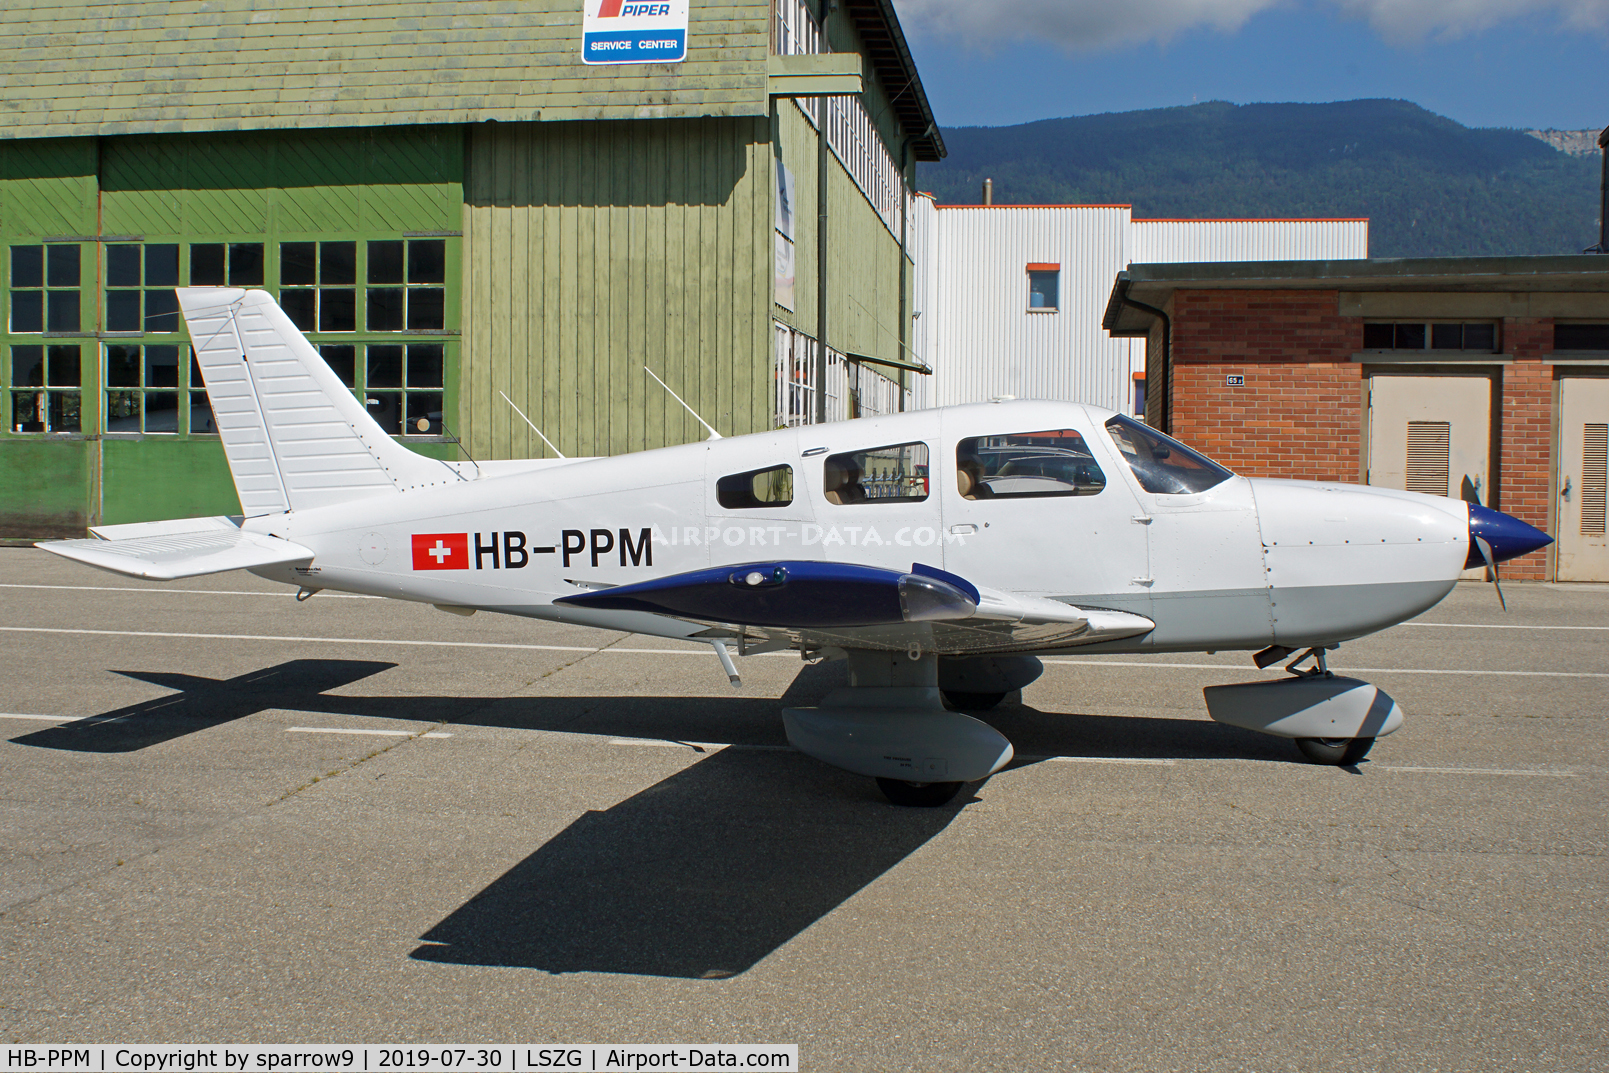 HB-PPM, 1997 Piper PA-28-181 Archer III C/N 2843095, At Grenchen. New paint-scheme. Maintenance? HB-registered since 1997-07-30